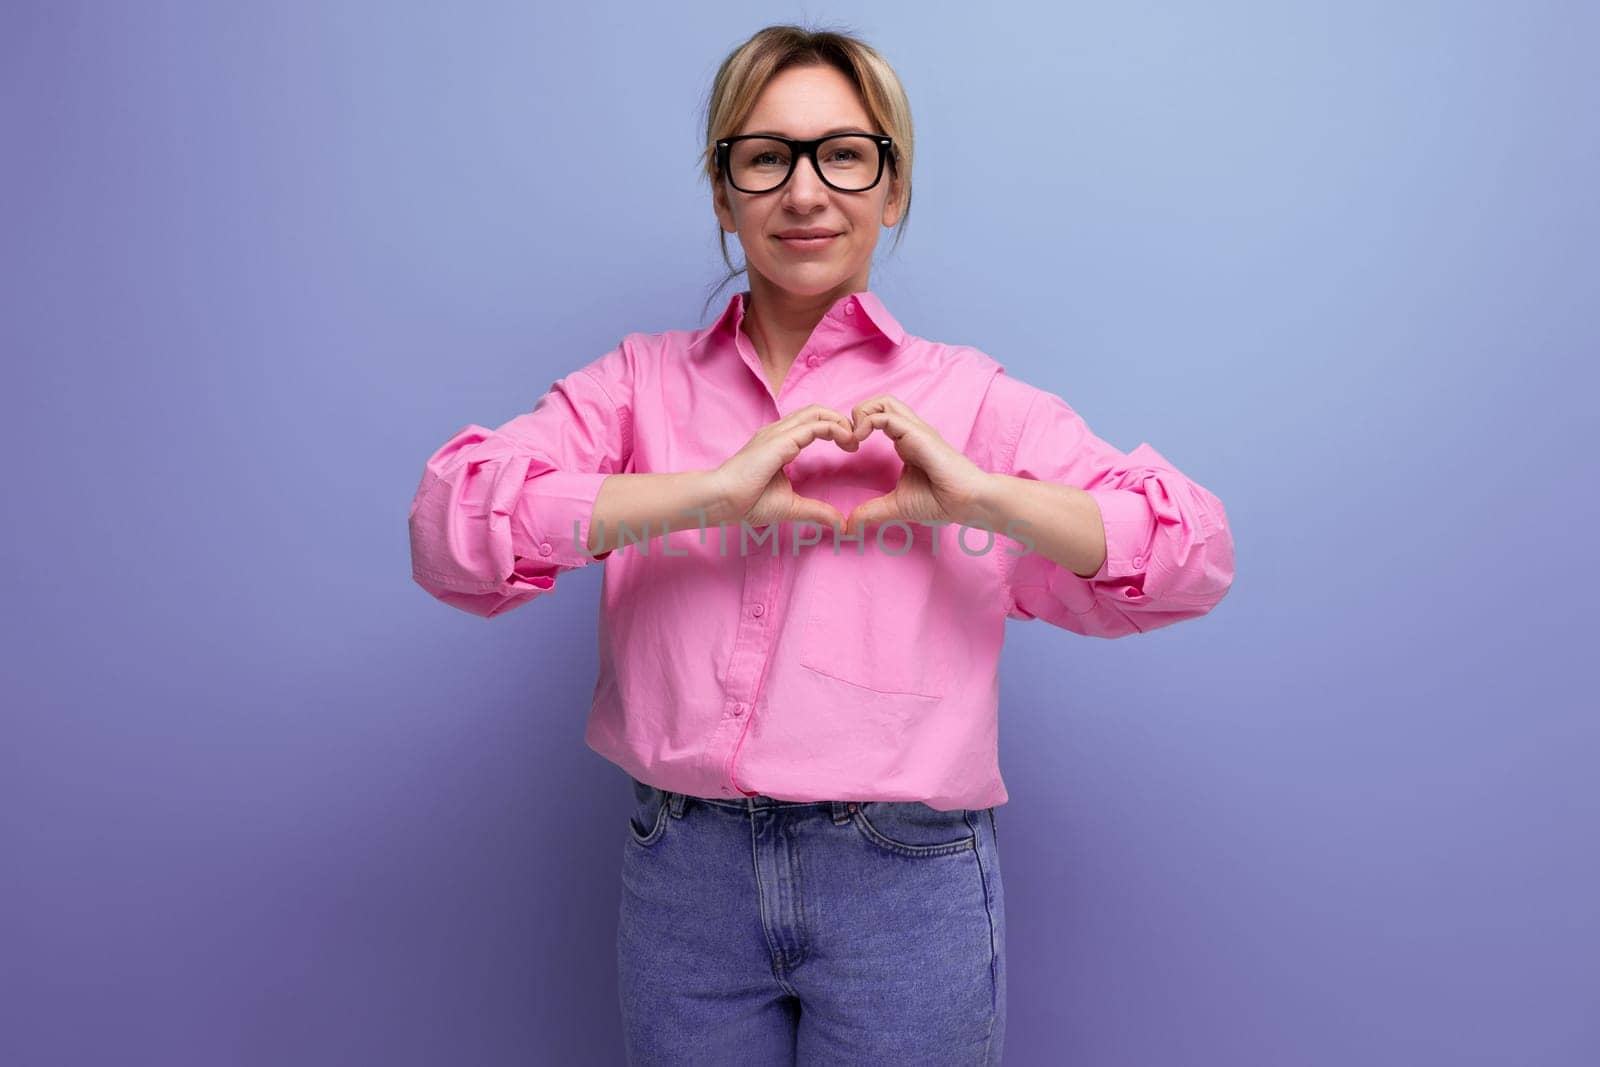 young energetic caucasian blonde secretary woman with ponytail hairstyle, glasses and in a pink shirt shows a heart on a studio background with copy space.